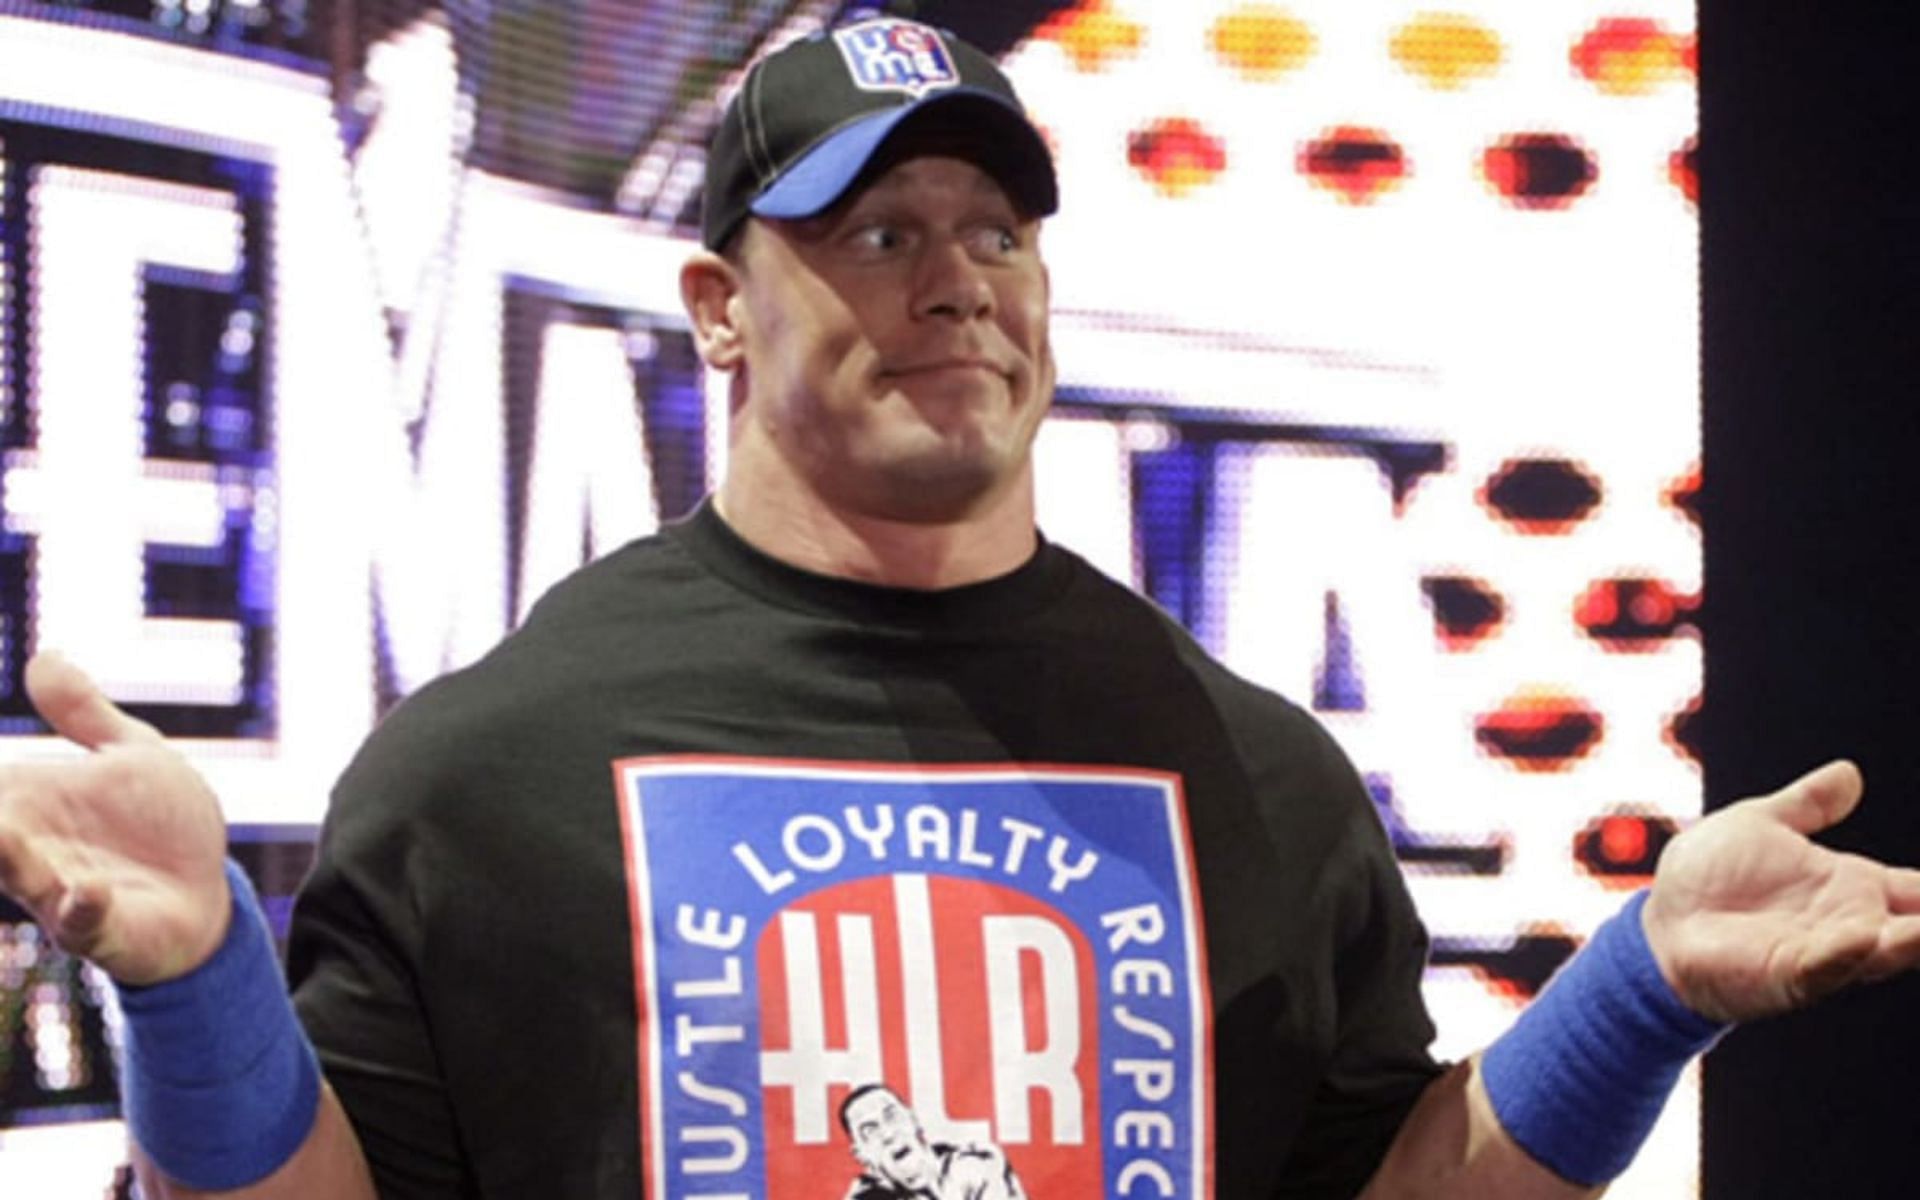 John Cena returned to compete on the last edition of SmackDown in 2022 